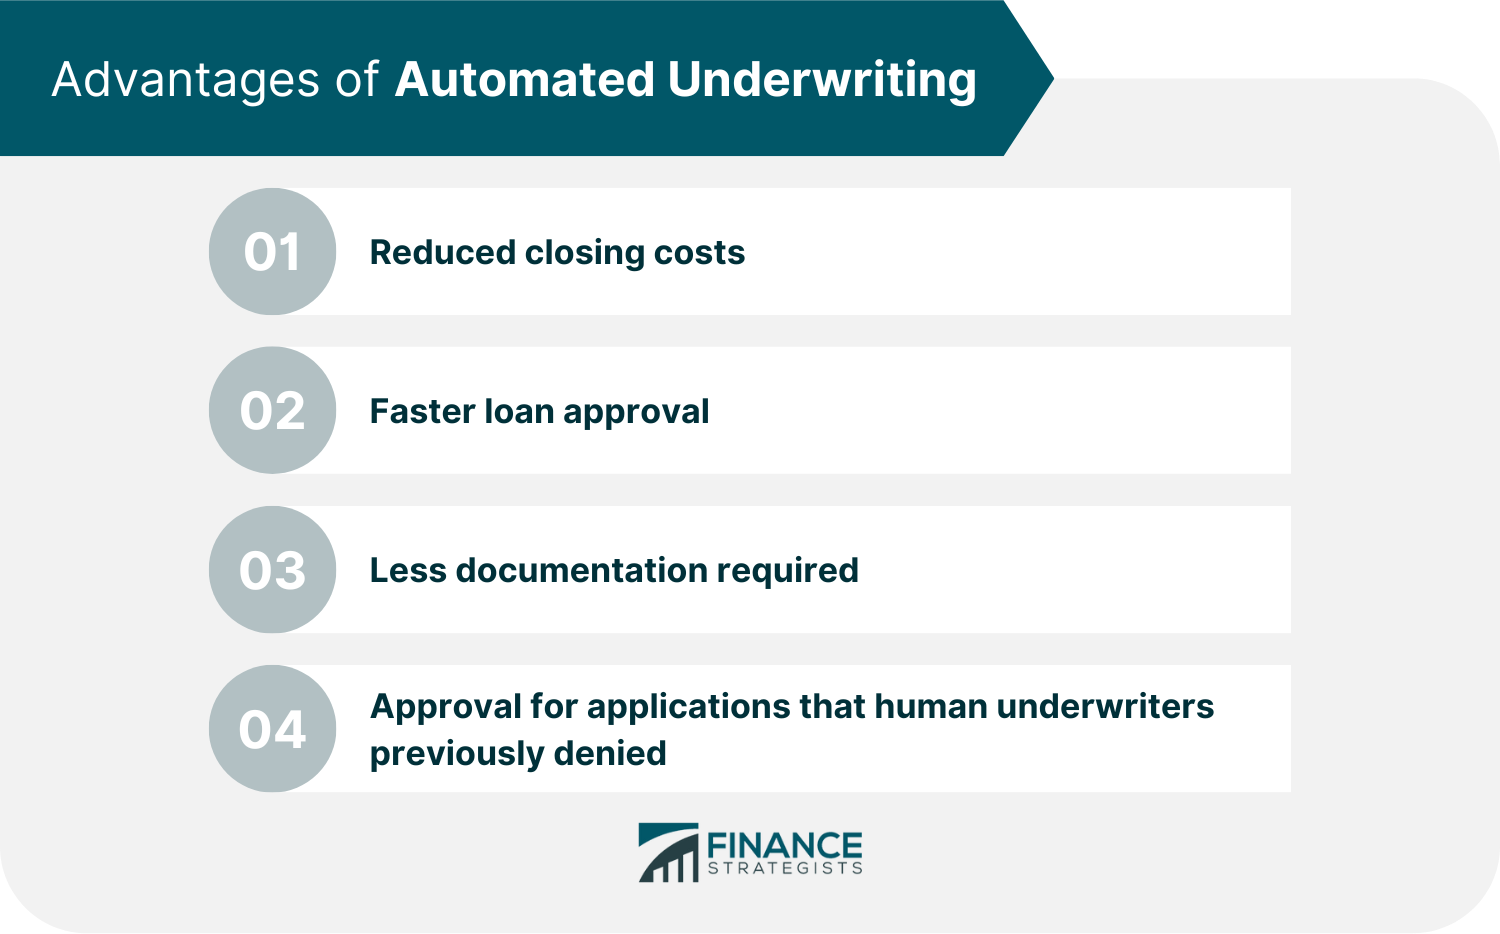 Advantages of Automated Underwriting